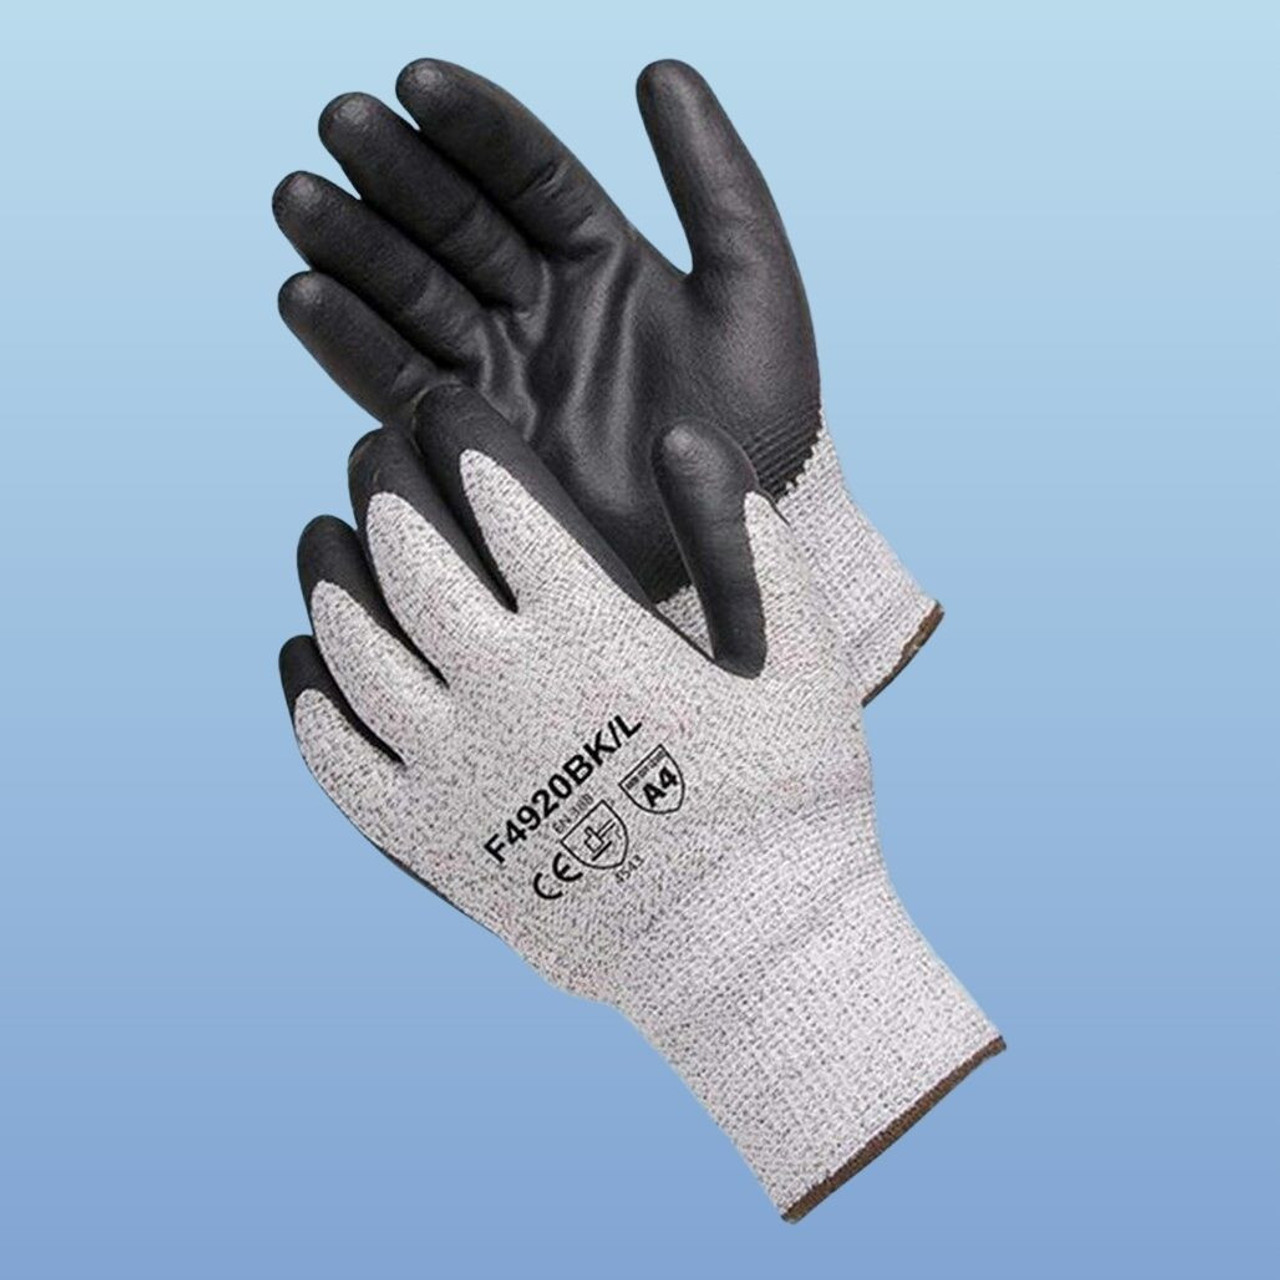 Liberty-HPPE with Black Foam Nitrile Palm Coated Small